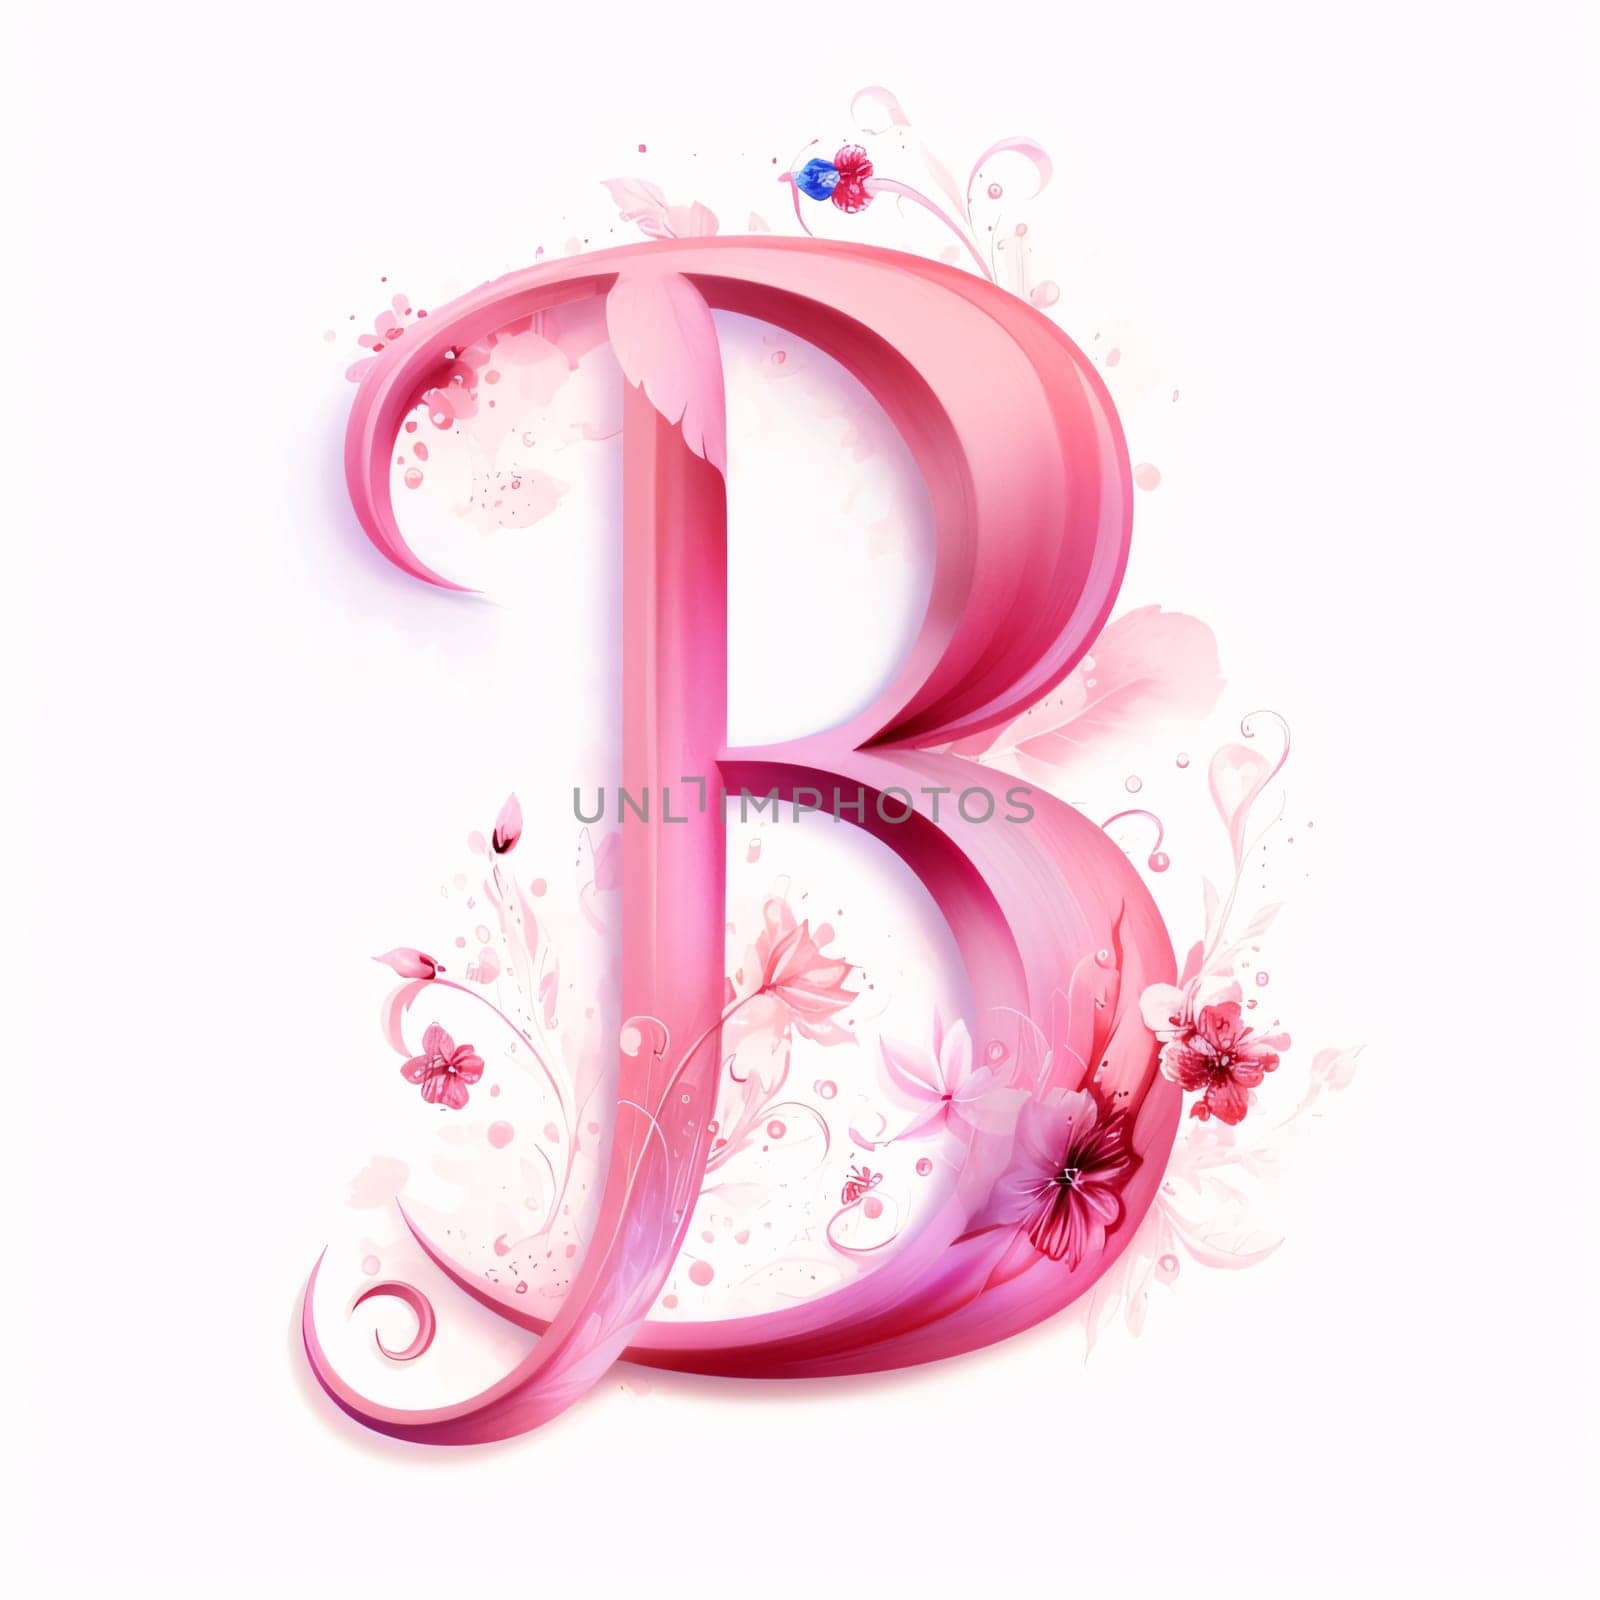 Graphic alphabet letters: Vector illustration of pink letter B with flowers and leaves on white background